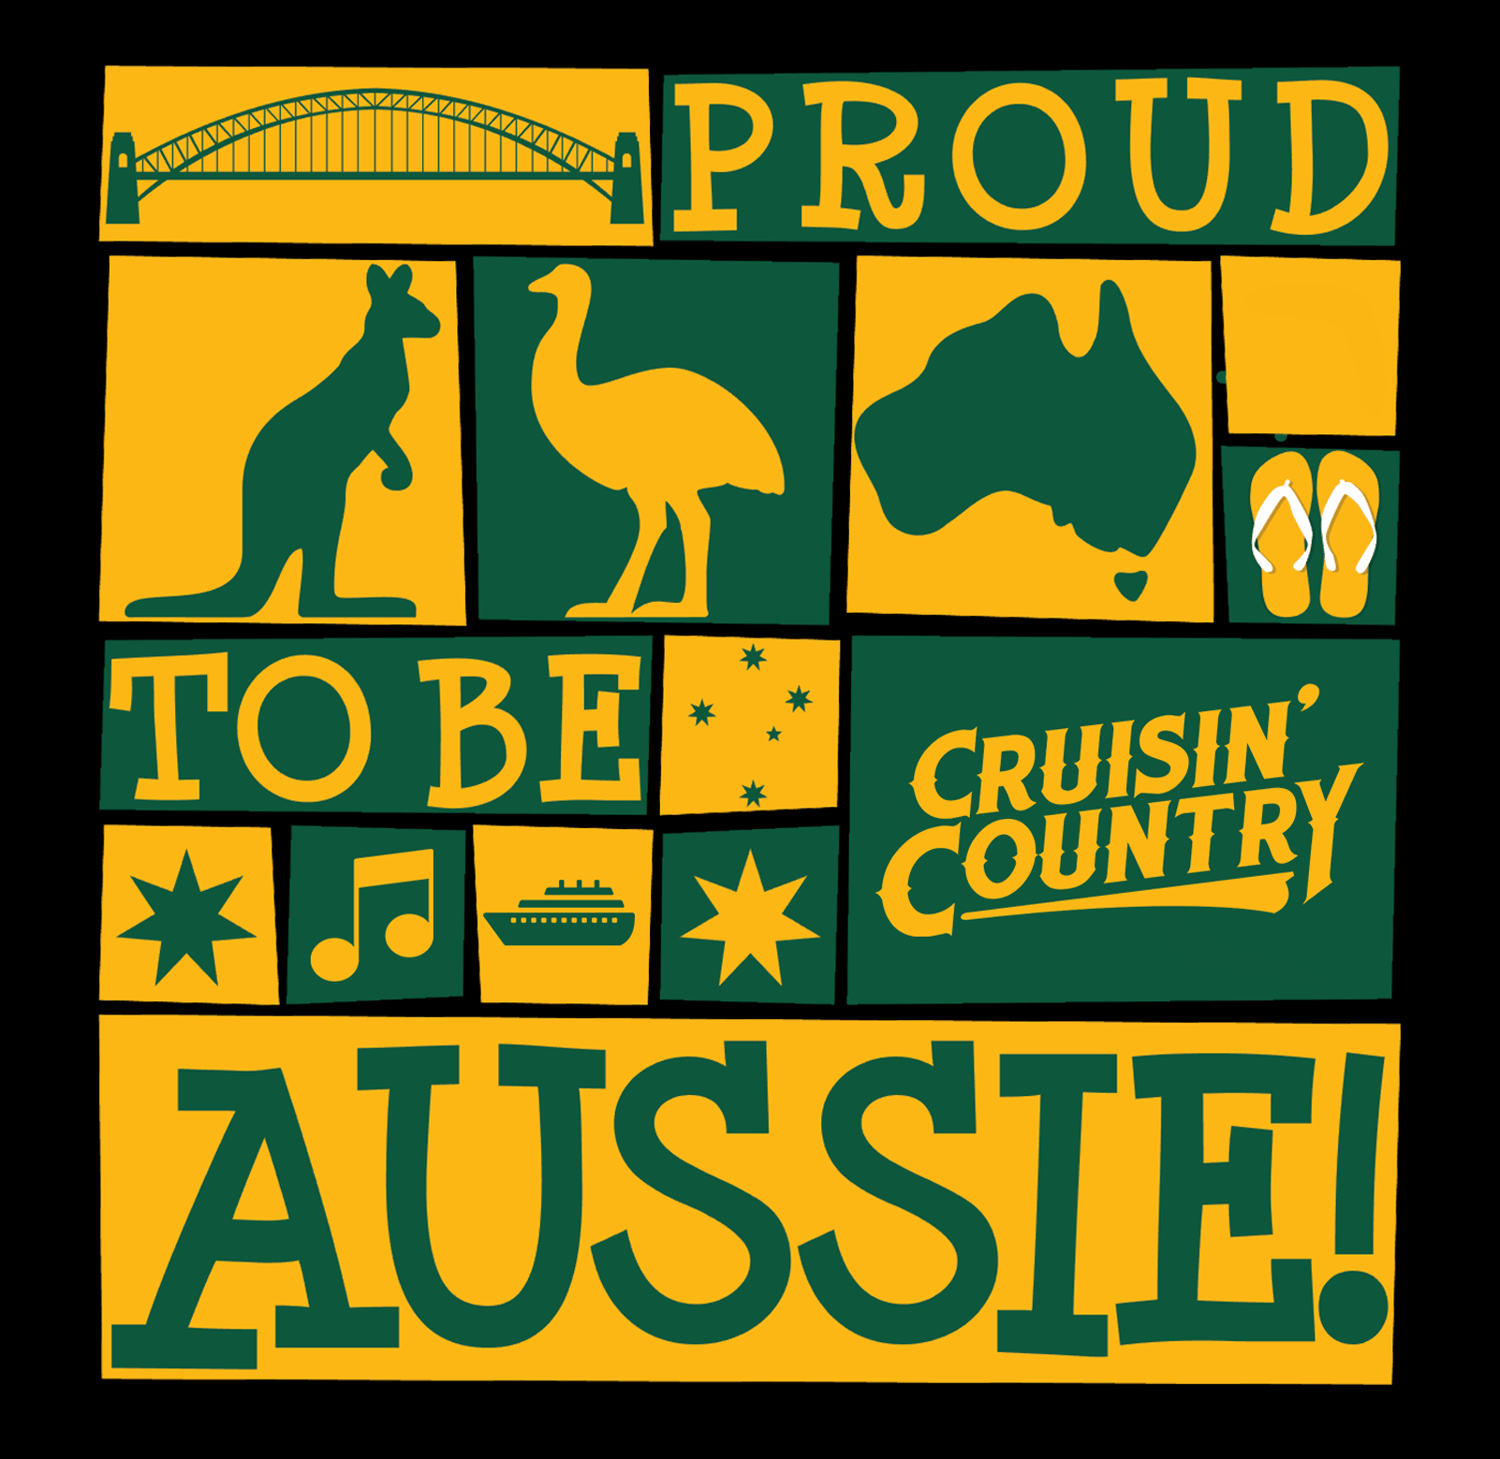 Image of Cruisin' Country Stubby Cooler - Proud to be Aussie